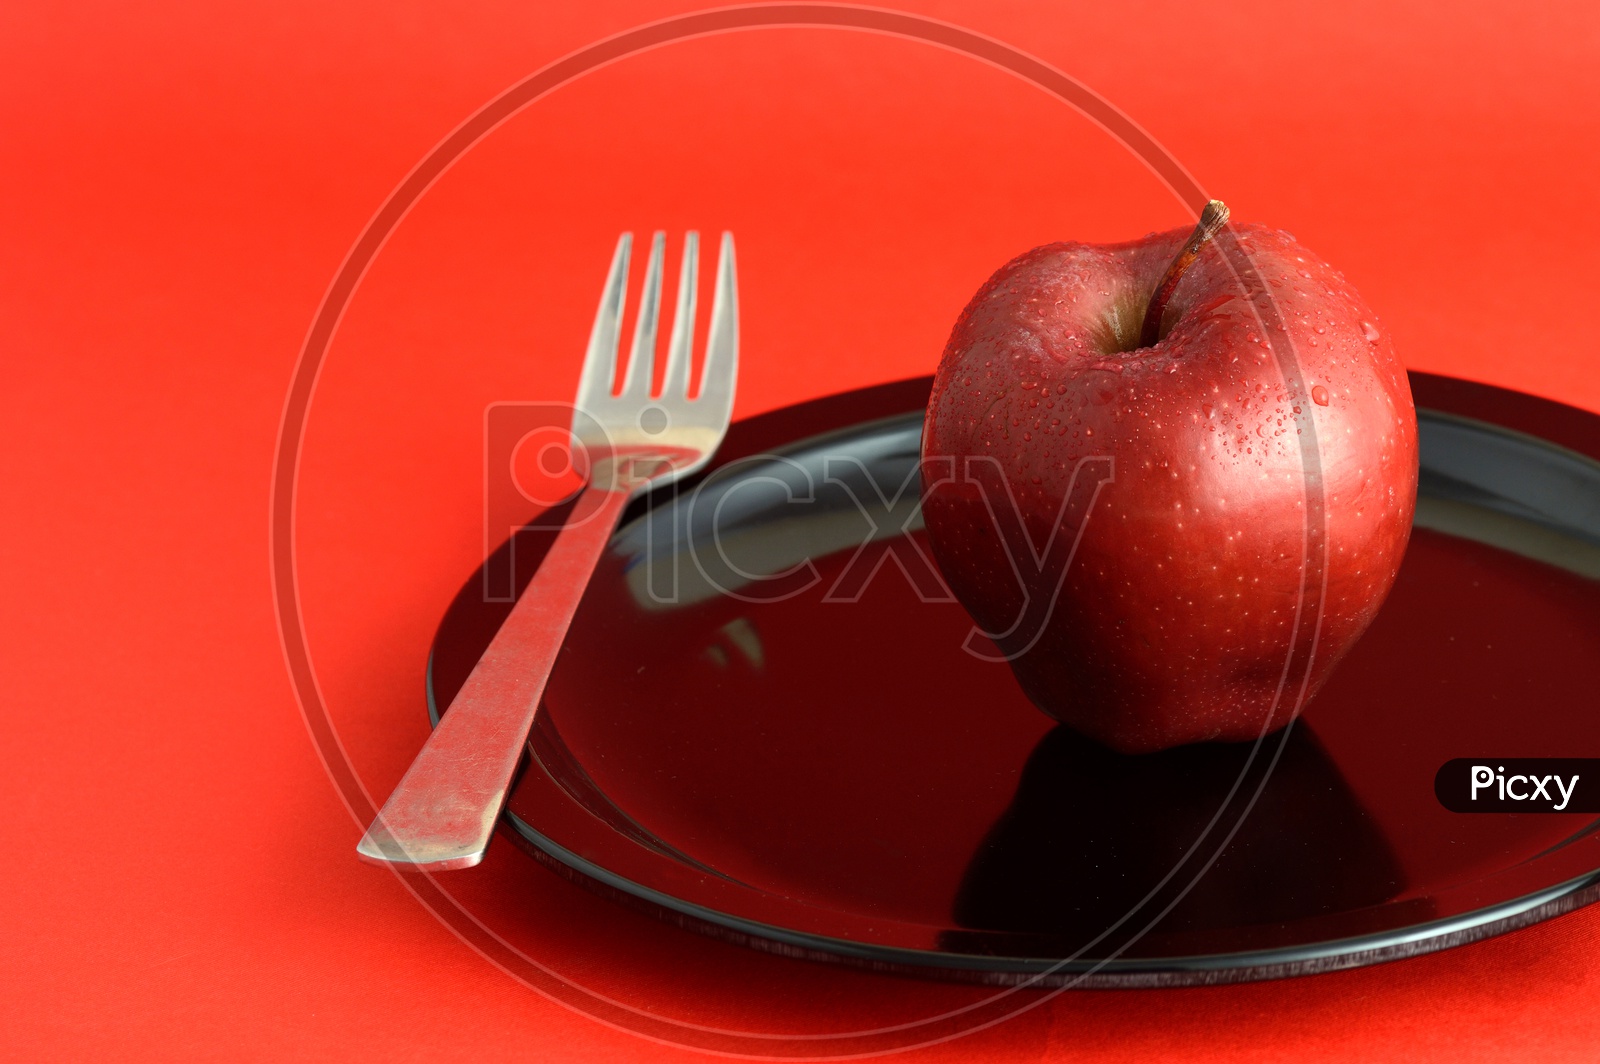 Ripen Red Apple on Black Plate With   Fork Over an Isolated Red Background